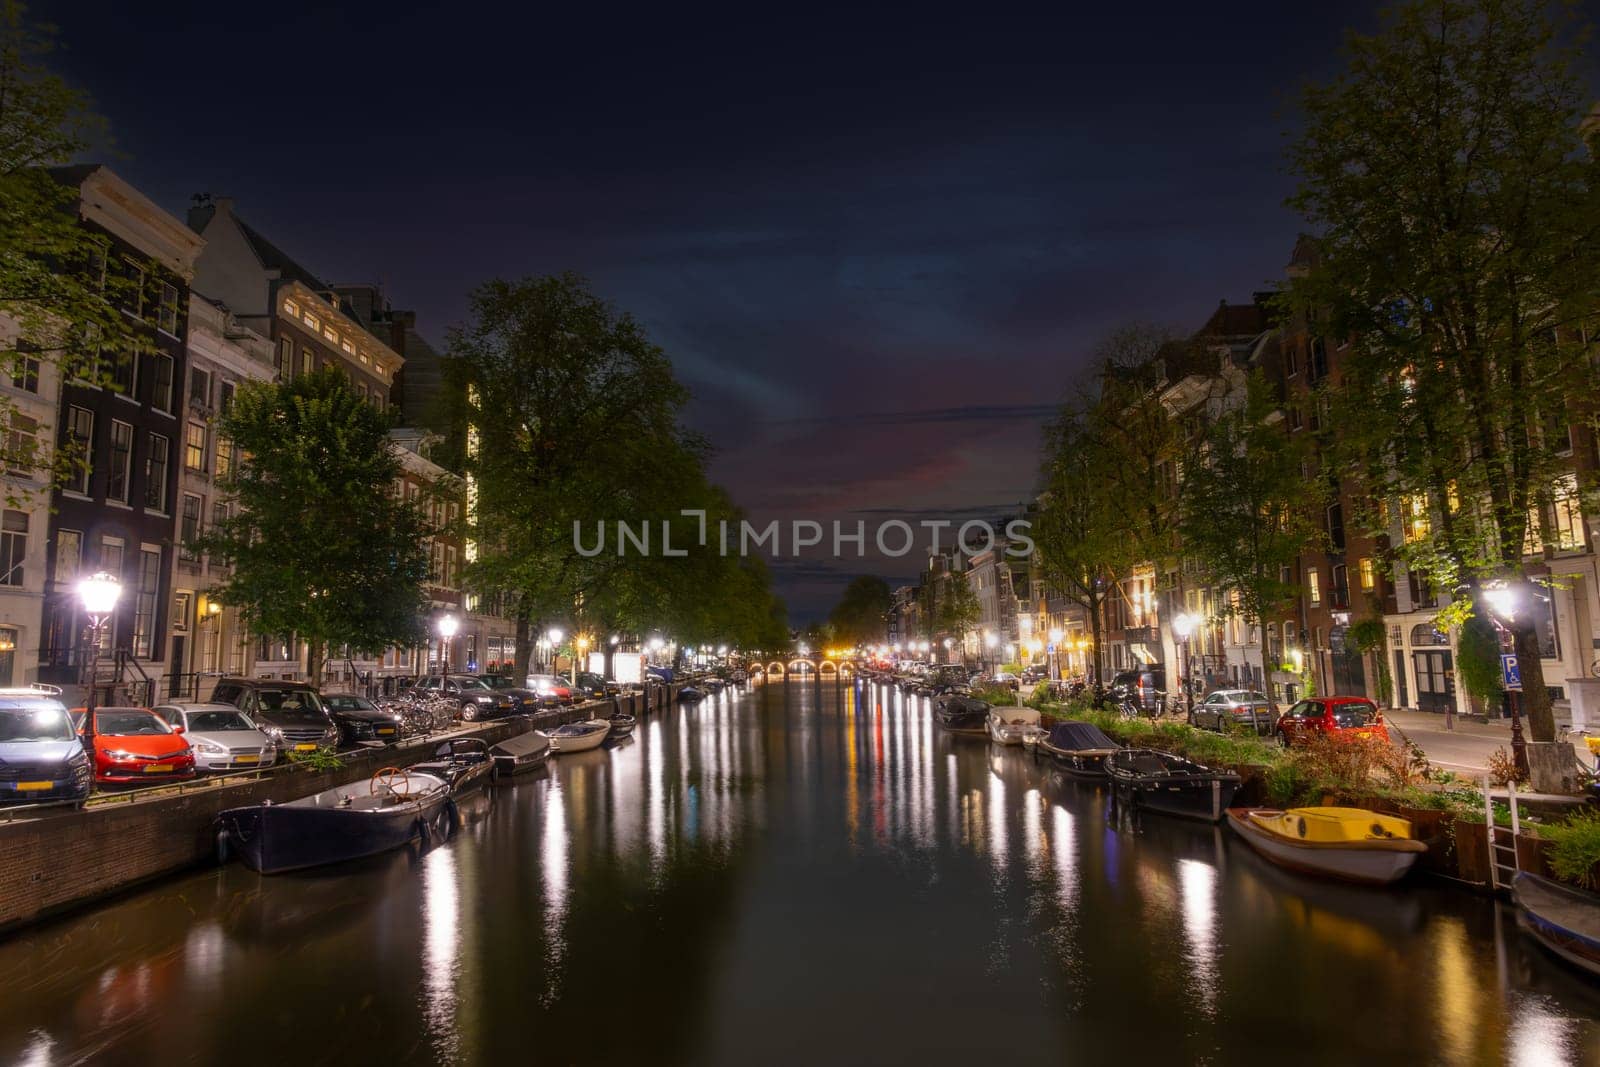 Netherlands. Summer night on the embankment of Amsterdam. Parked cars and lamps on embankments. Boats moored along the banks of the canal